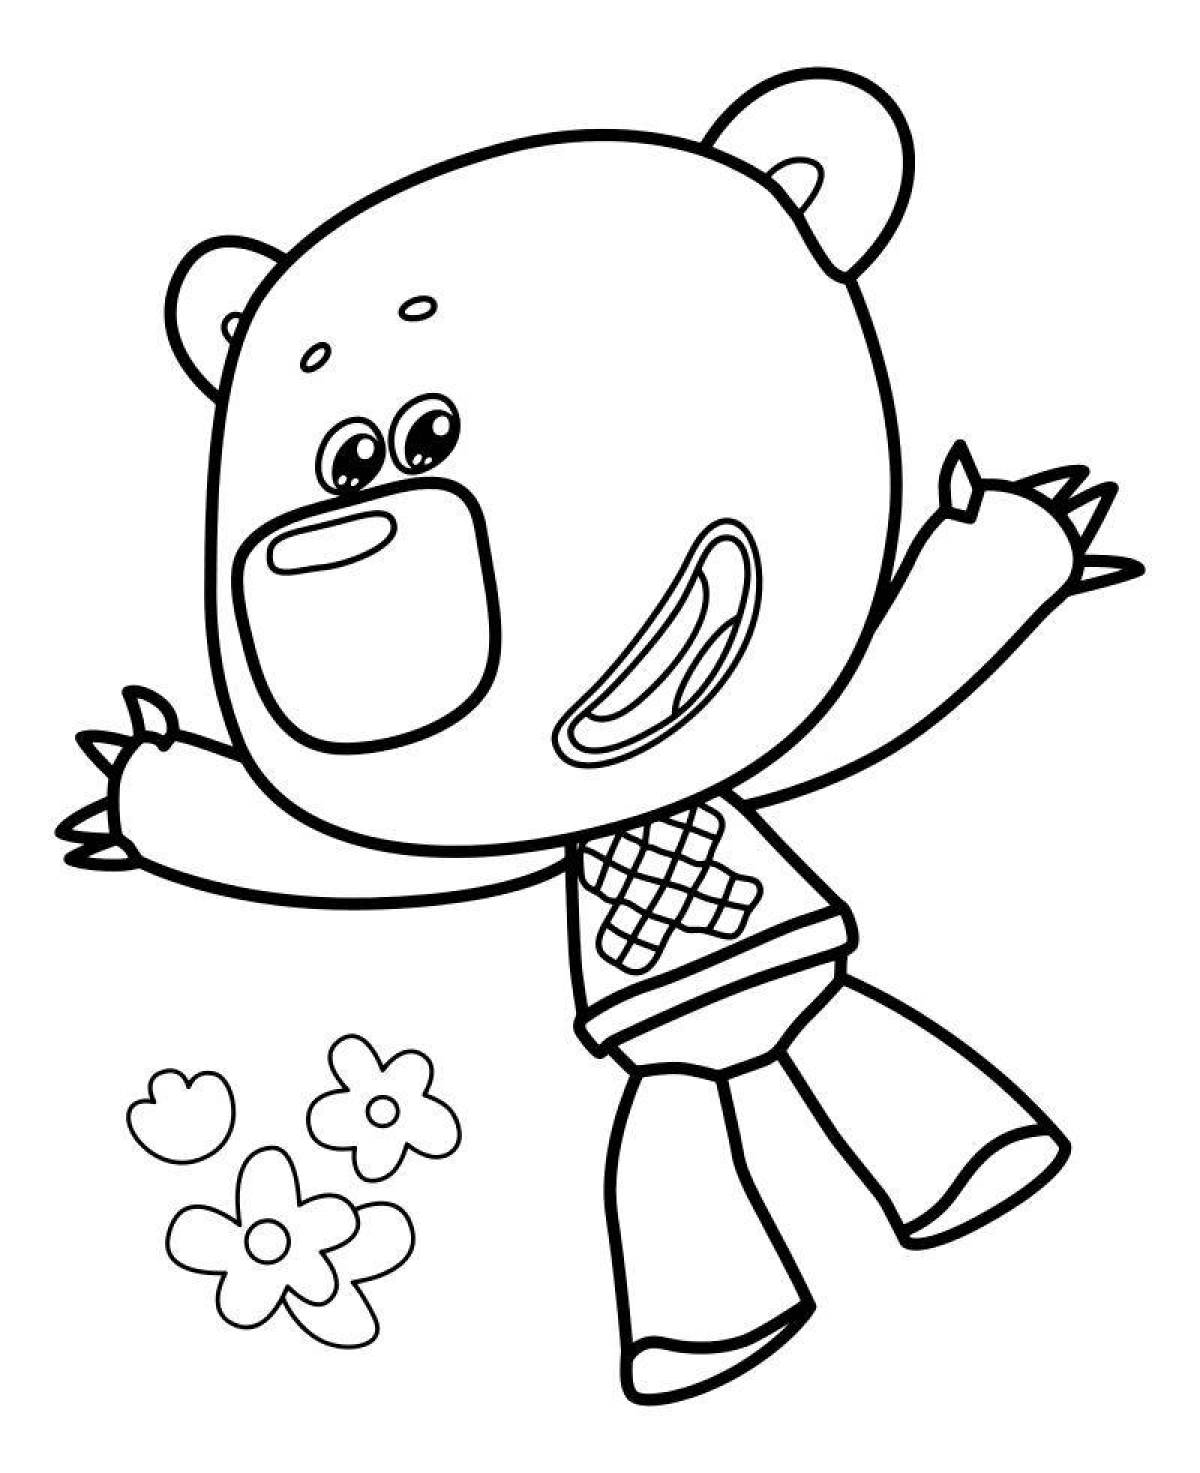 Adorable Cartoon Cute Bear Coloring Pages